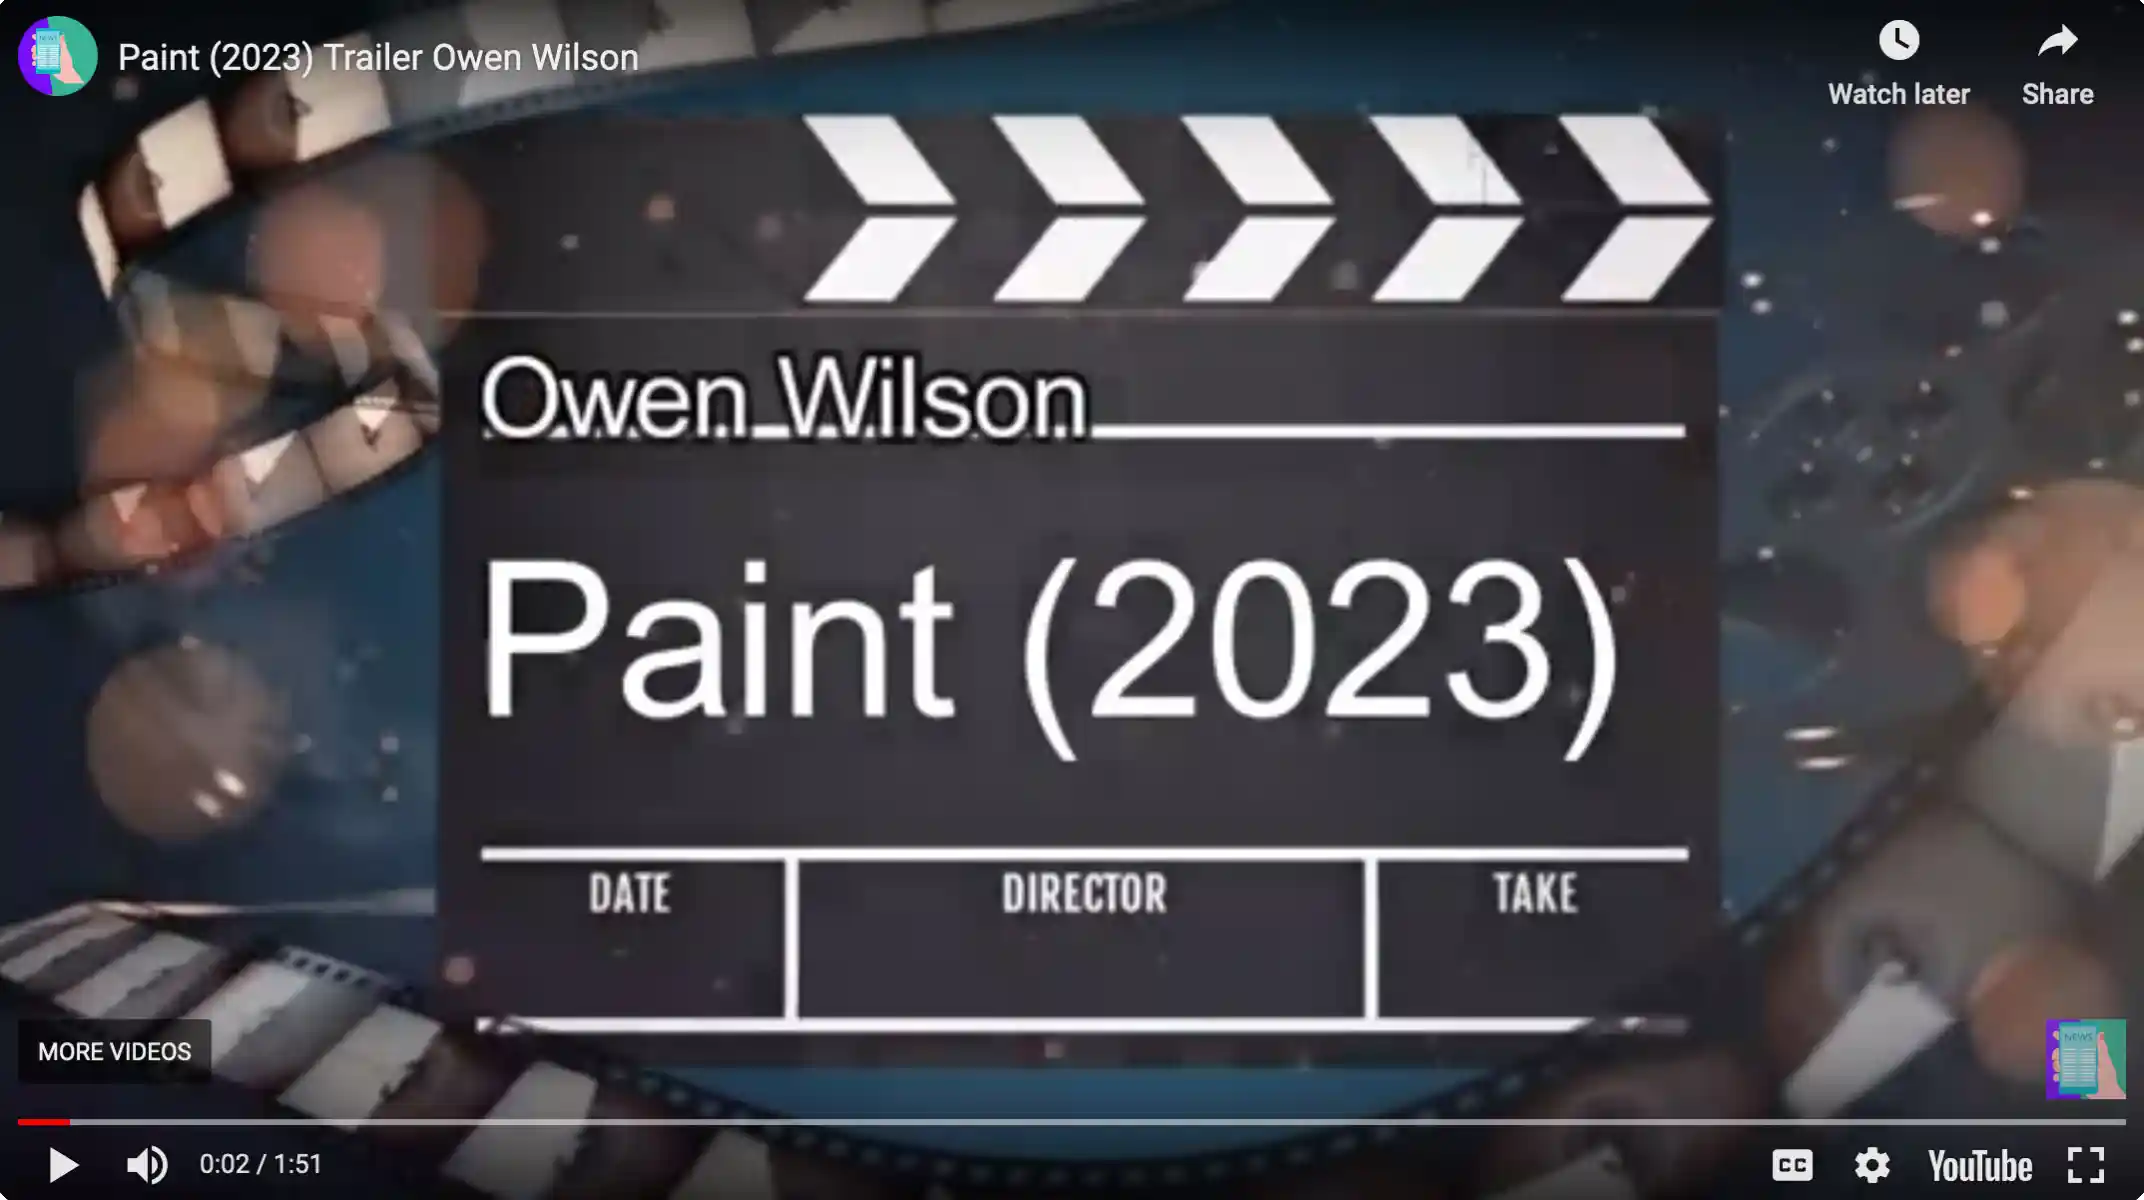 Paint video on YouTube Mentions Cast, including Cris Gaunt